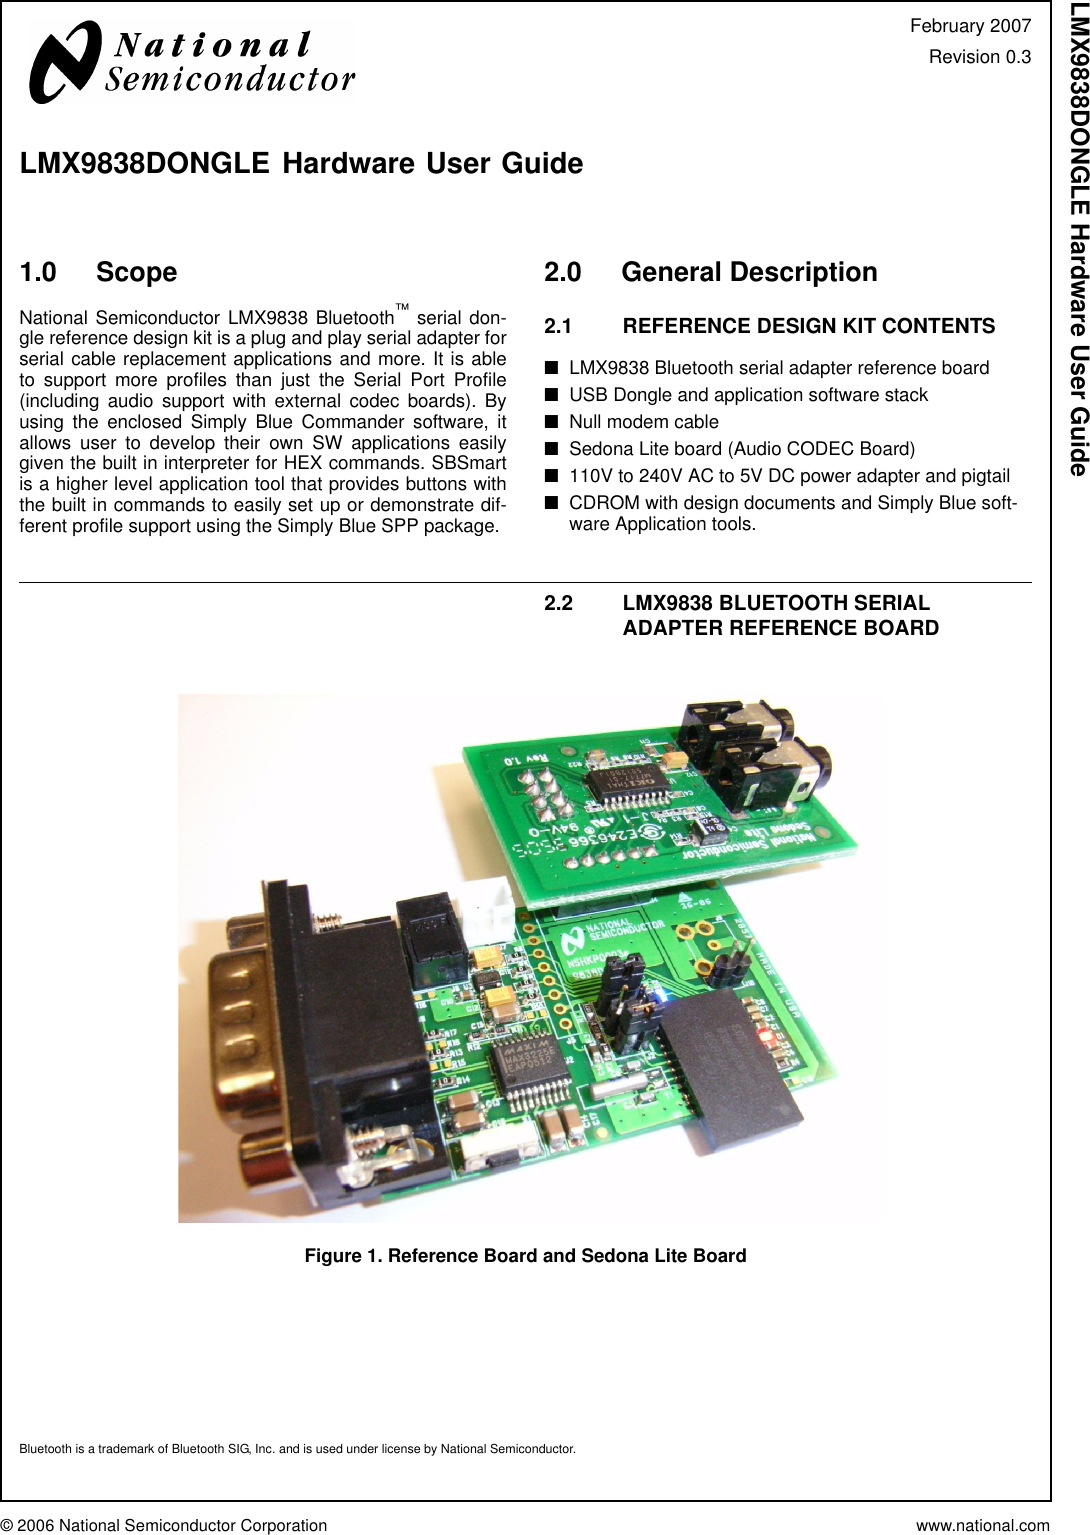 © 2006 National Semiconductor Corporation www.national.comLMX9838DONGLE Hardware User Guide1.0 ScopeNational Semiconductor LMX9838 Bluetooth™ serial don-gle reference design kit is a plug and play serial adapter forserial cable replacement applications and more. It is ableto support more profiles than just the Serial Port Profile(including audio support with external codec boards). Byusing the enclosed Simply Blue Commander software, itallows user to develop their own SW applications easilygiven the built in interpreter for HEX commands. SBSmartis a higher level application tool that provides buttons withthe built in commands to easily set up or demonstrate dif-ferent profile support using the Simply Blue SPP package.2.0 General Description2.1 REFERENCE DESIGN KIT CONTENTS■LMX9838 Bluetooth serial adapter reference board■USB Dongle and application software stack■Null modem cable■Sedona Lite board (Audio CODEC Board)■110V to 240V AC to 5V DC power adapter and pigtail■CDROM with design documents and Simply Blue soft-ware Application tools.2.2 LMX9838 BLUETOOTH SERIAL ADAPTER REFERENCE BOARDFigure 1. Reference Board and Sedona Lite BoardBluetooth is a trademark of Bluetooth SIG, Inc. and is used under license by National Semiconductor.February 2007Revision 0.3LMX9838DONGLE Hardware User Guide